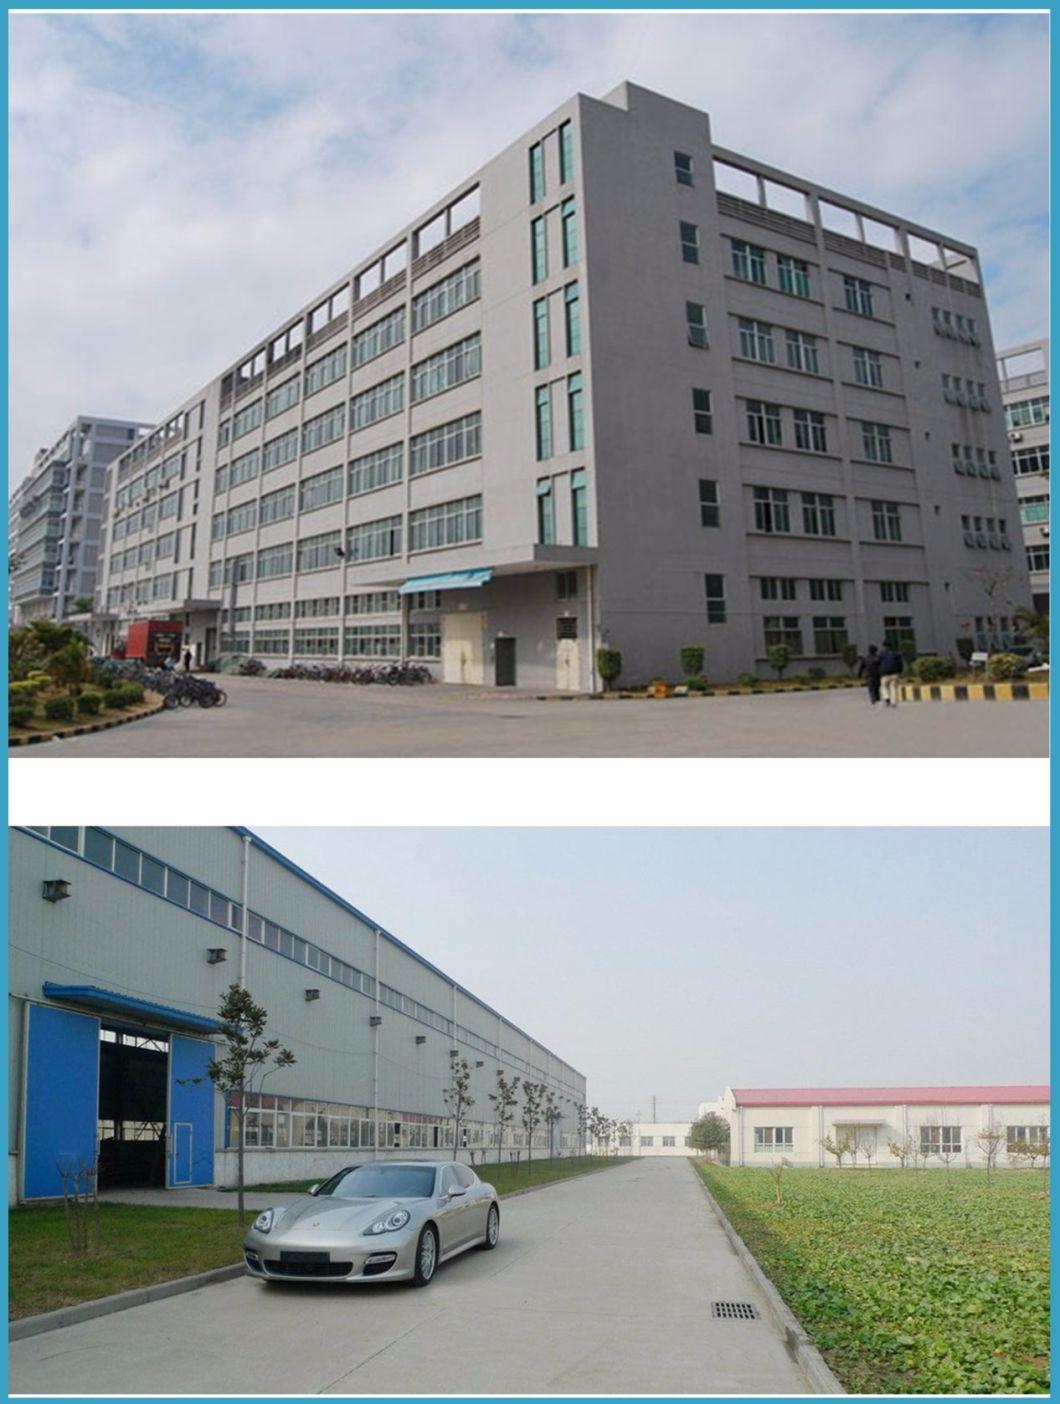 China Types Pivot Irrigation Center for Agriculture with Diesel Generator and Pump